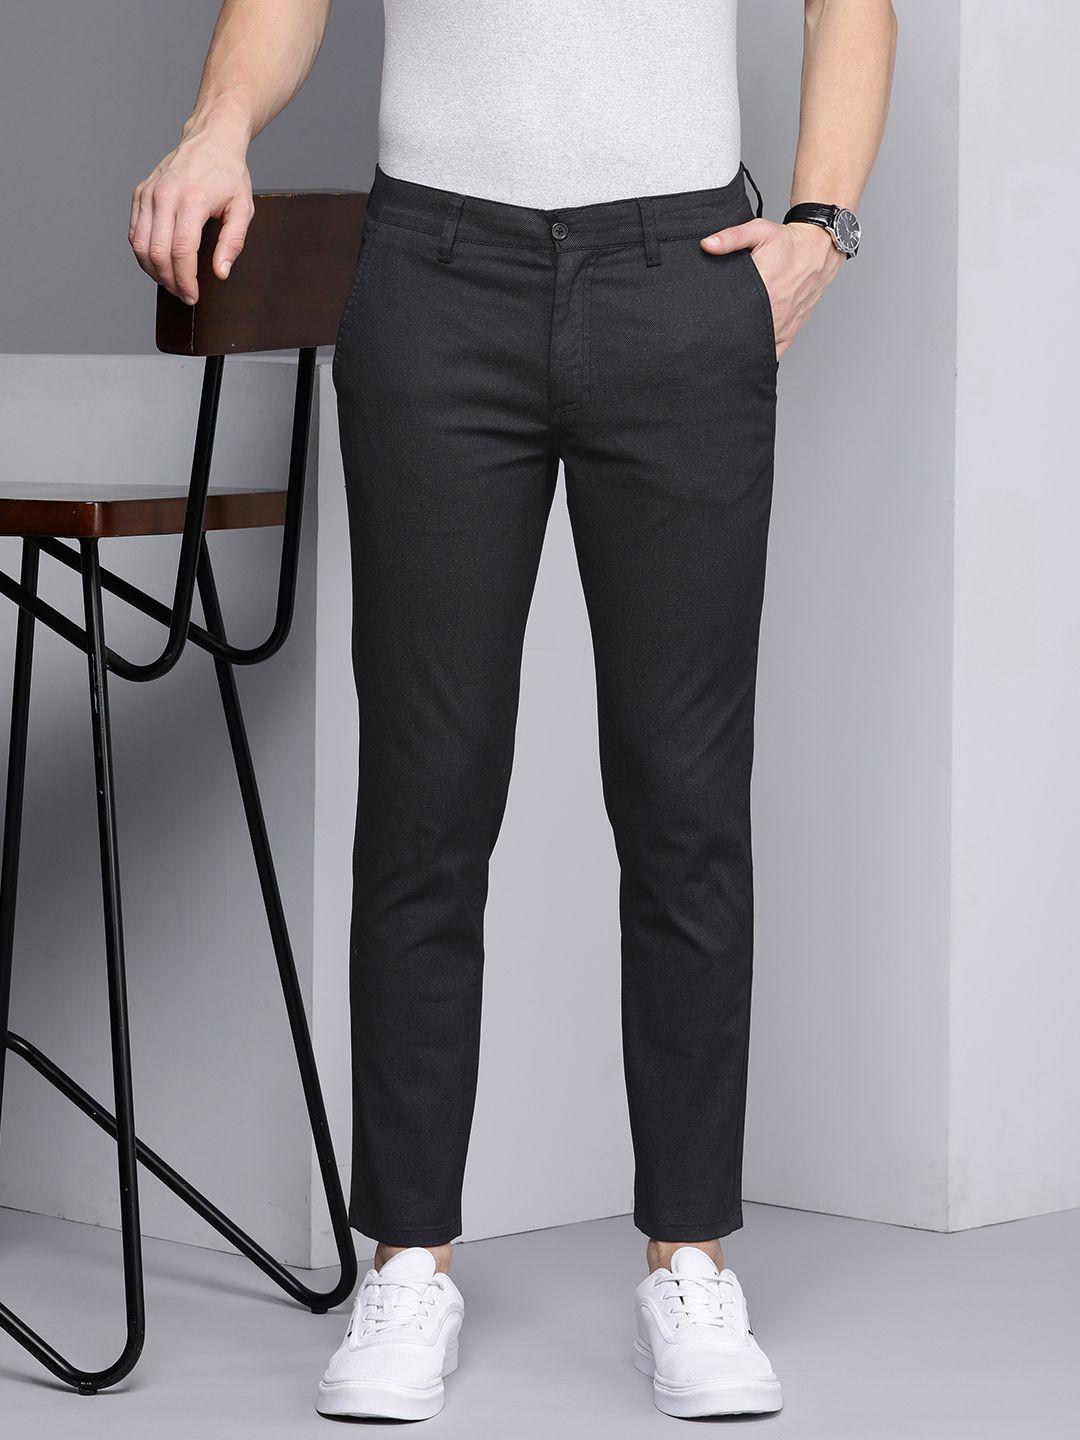 kenneth-cole-men-striped-slim-fit-trousers